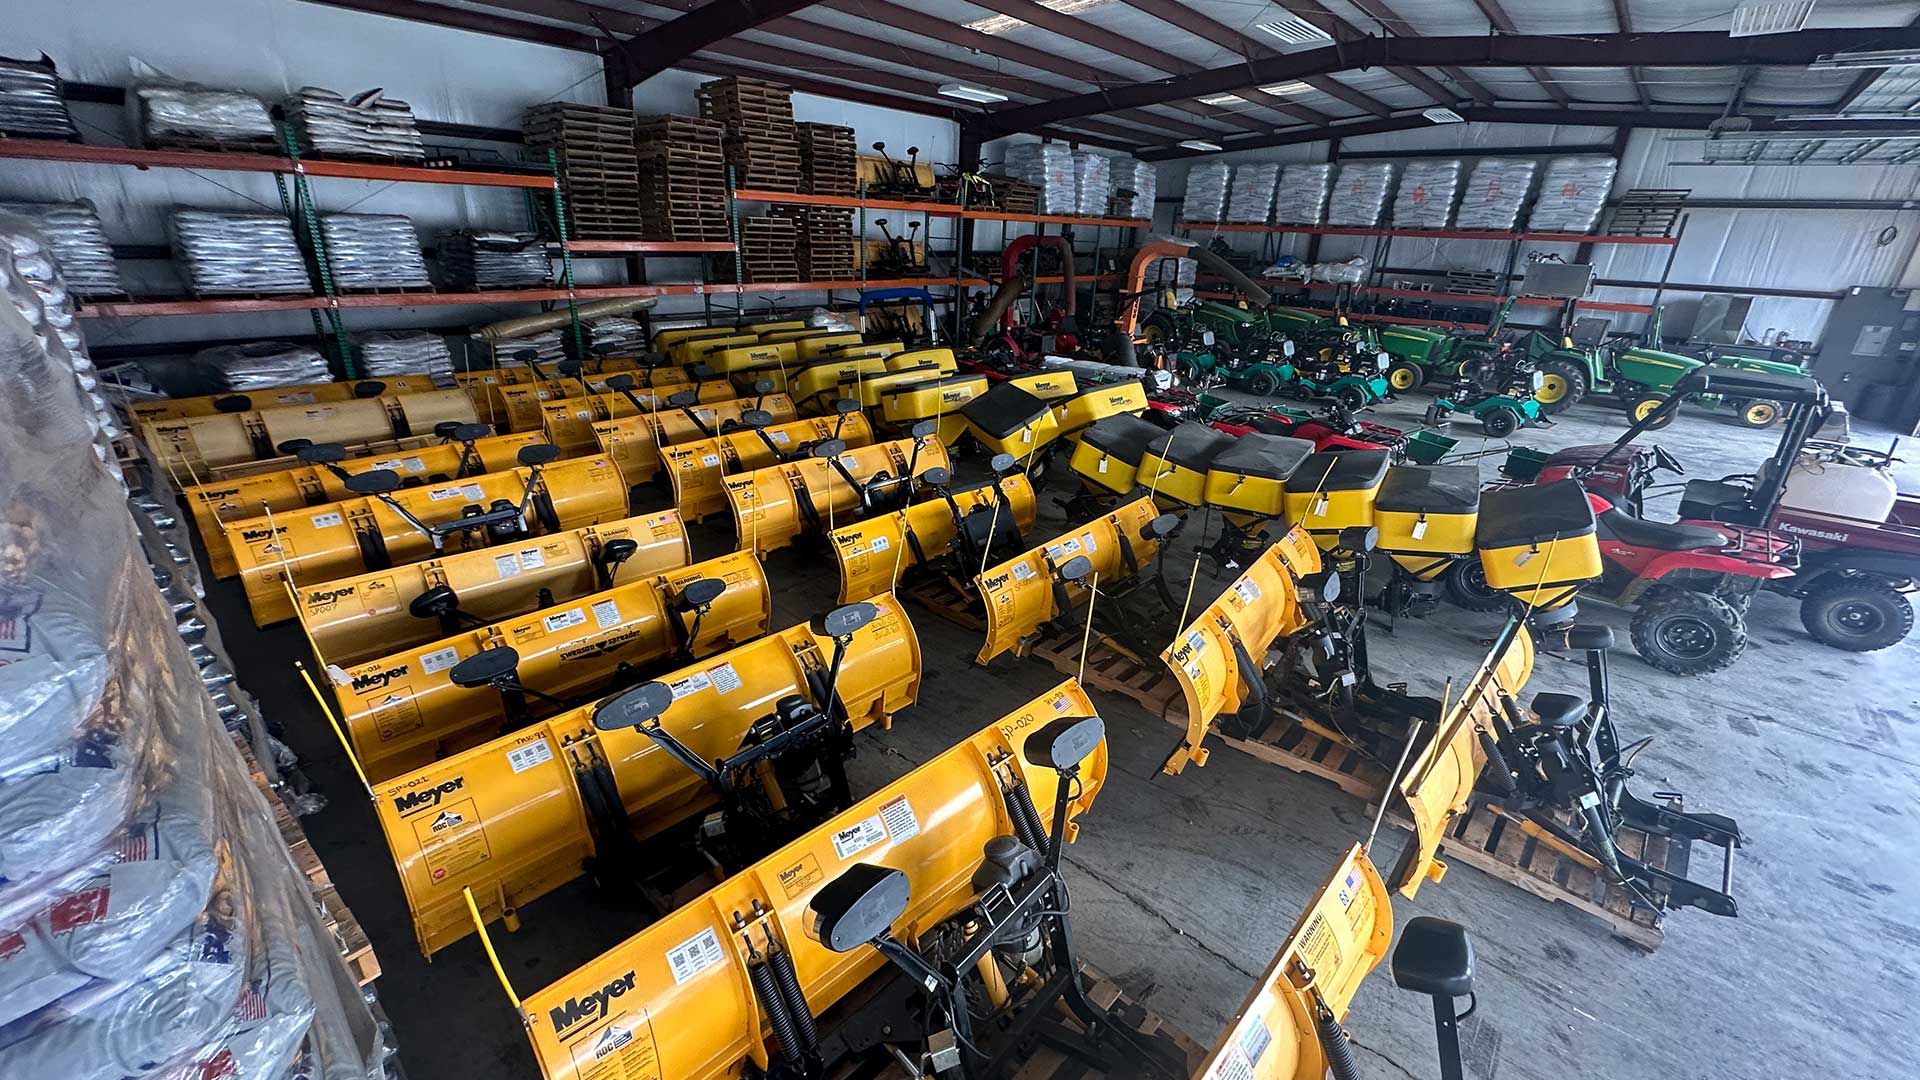 Our snow removal equipment, including snow plows, four wheelers, and ice melt.